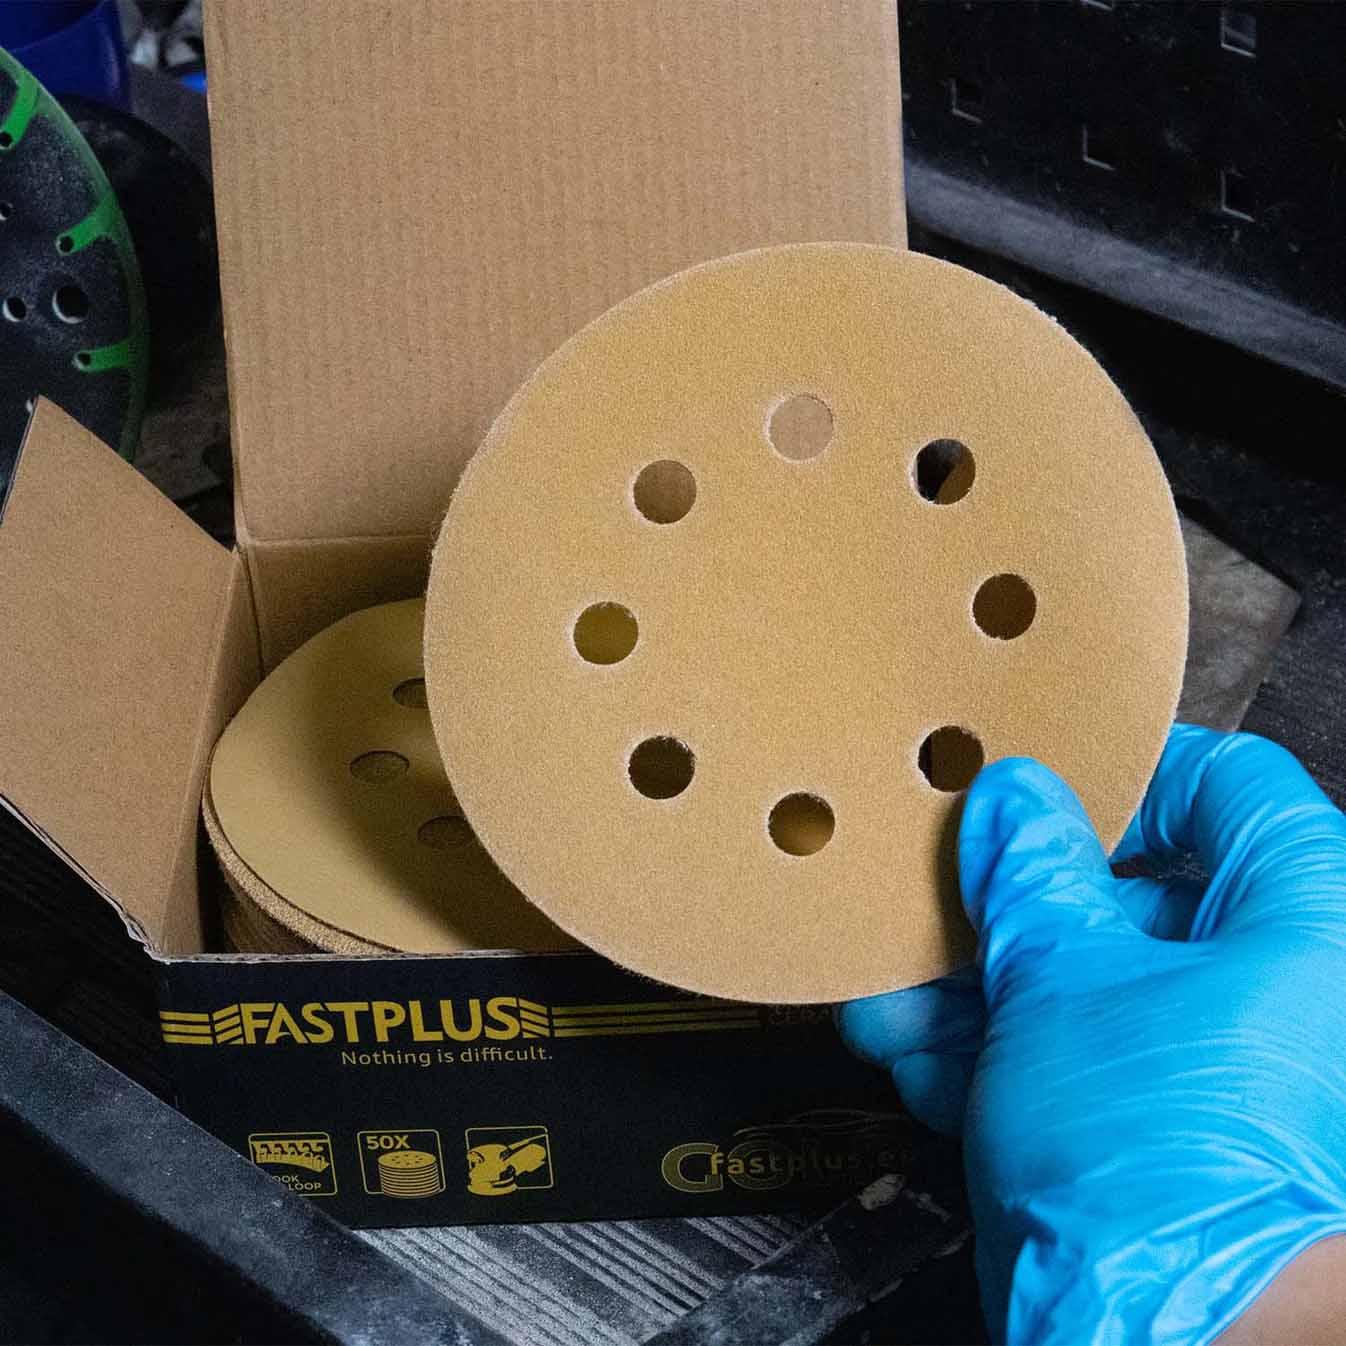 Sanding Discs 125mm Velcro F15 Gold with 8 Holes 